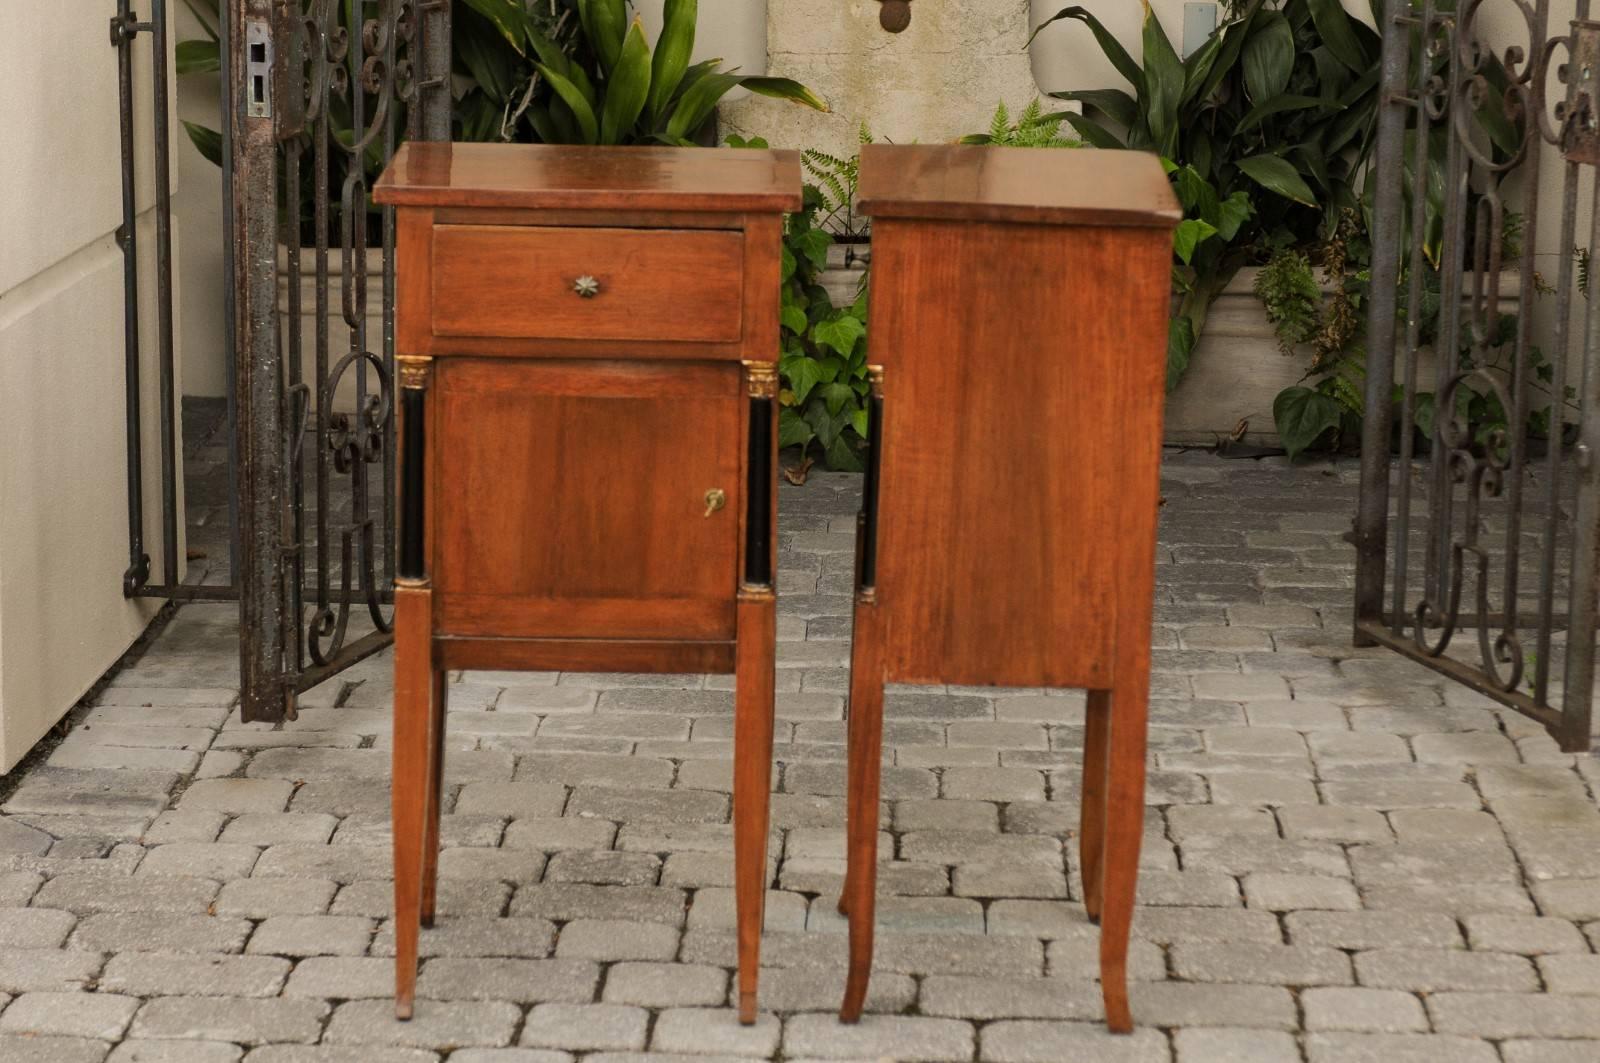 Pair of 1840s Biedermeier Walnut Stands with Drawer, Door and Semi-Columns For Sale 4